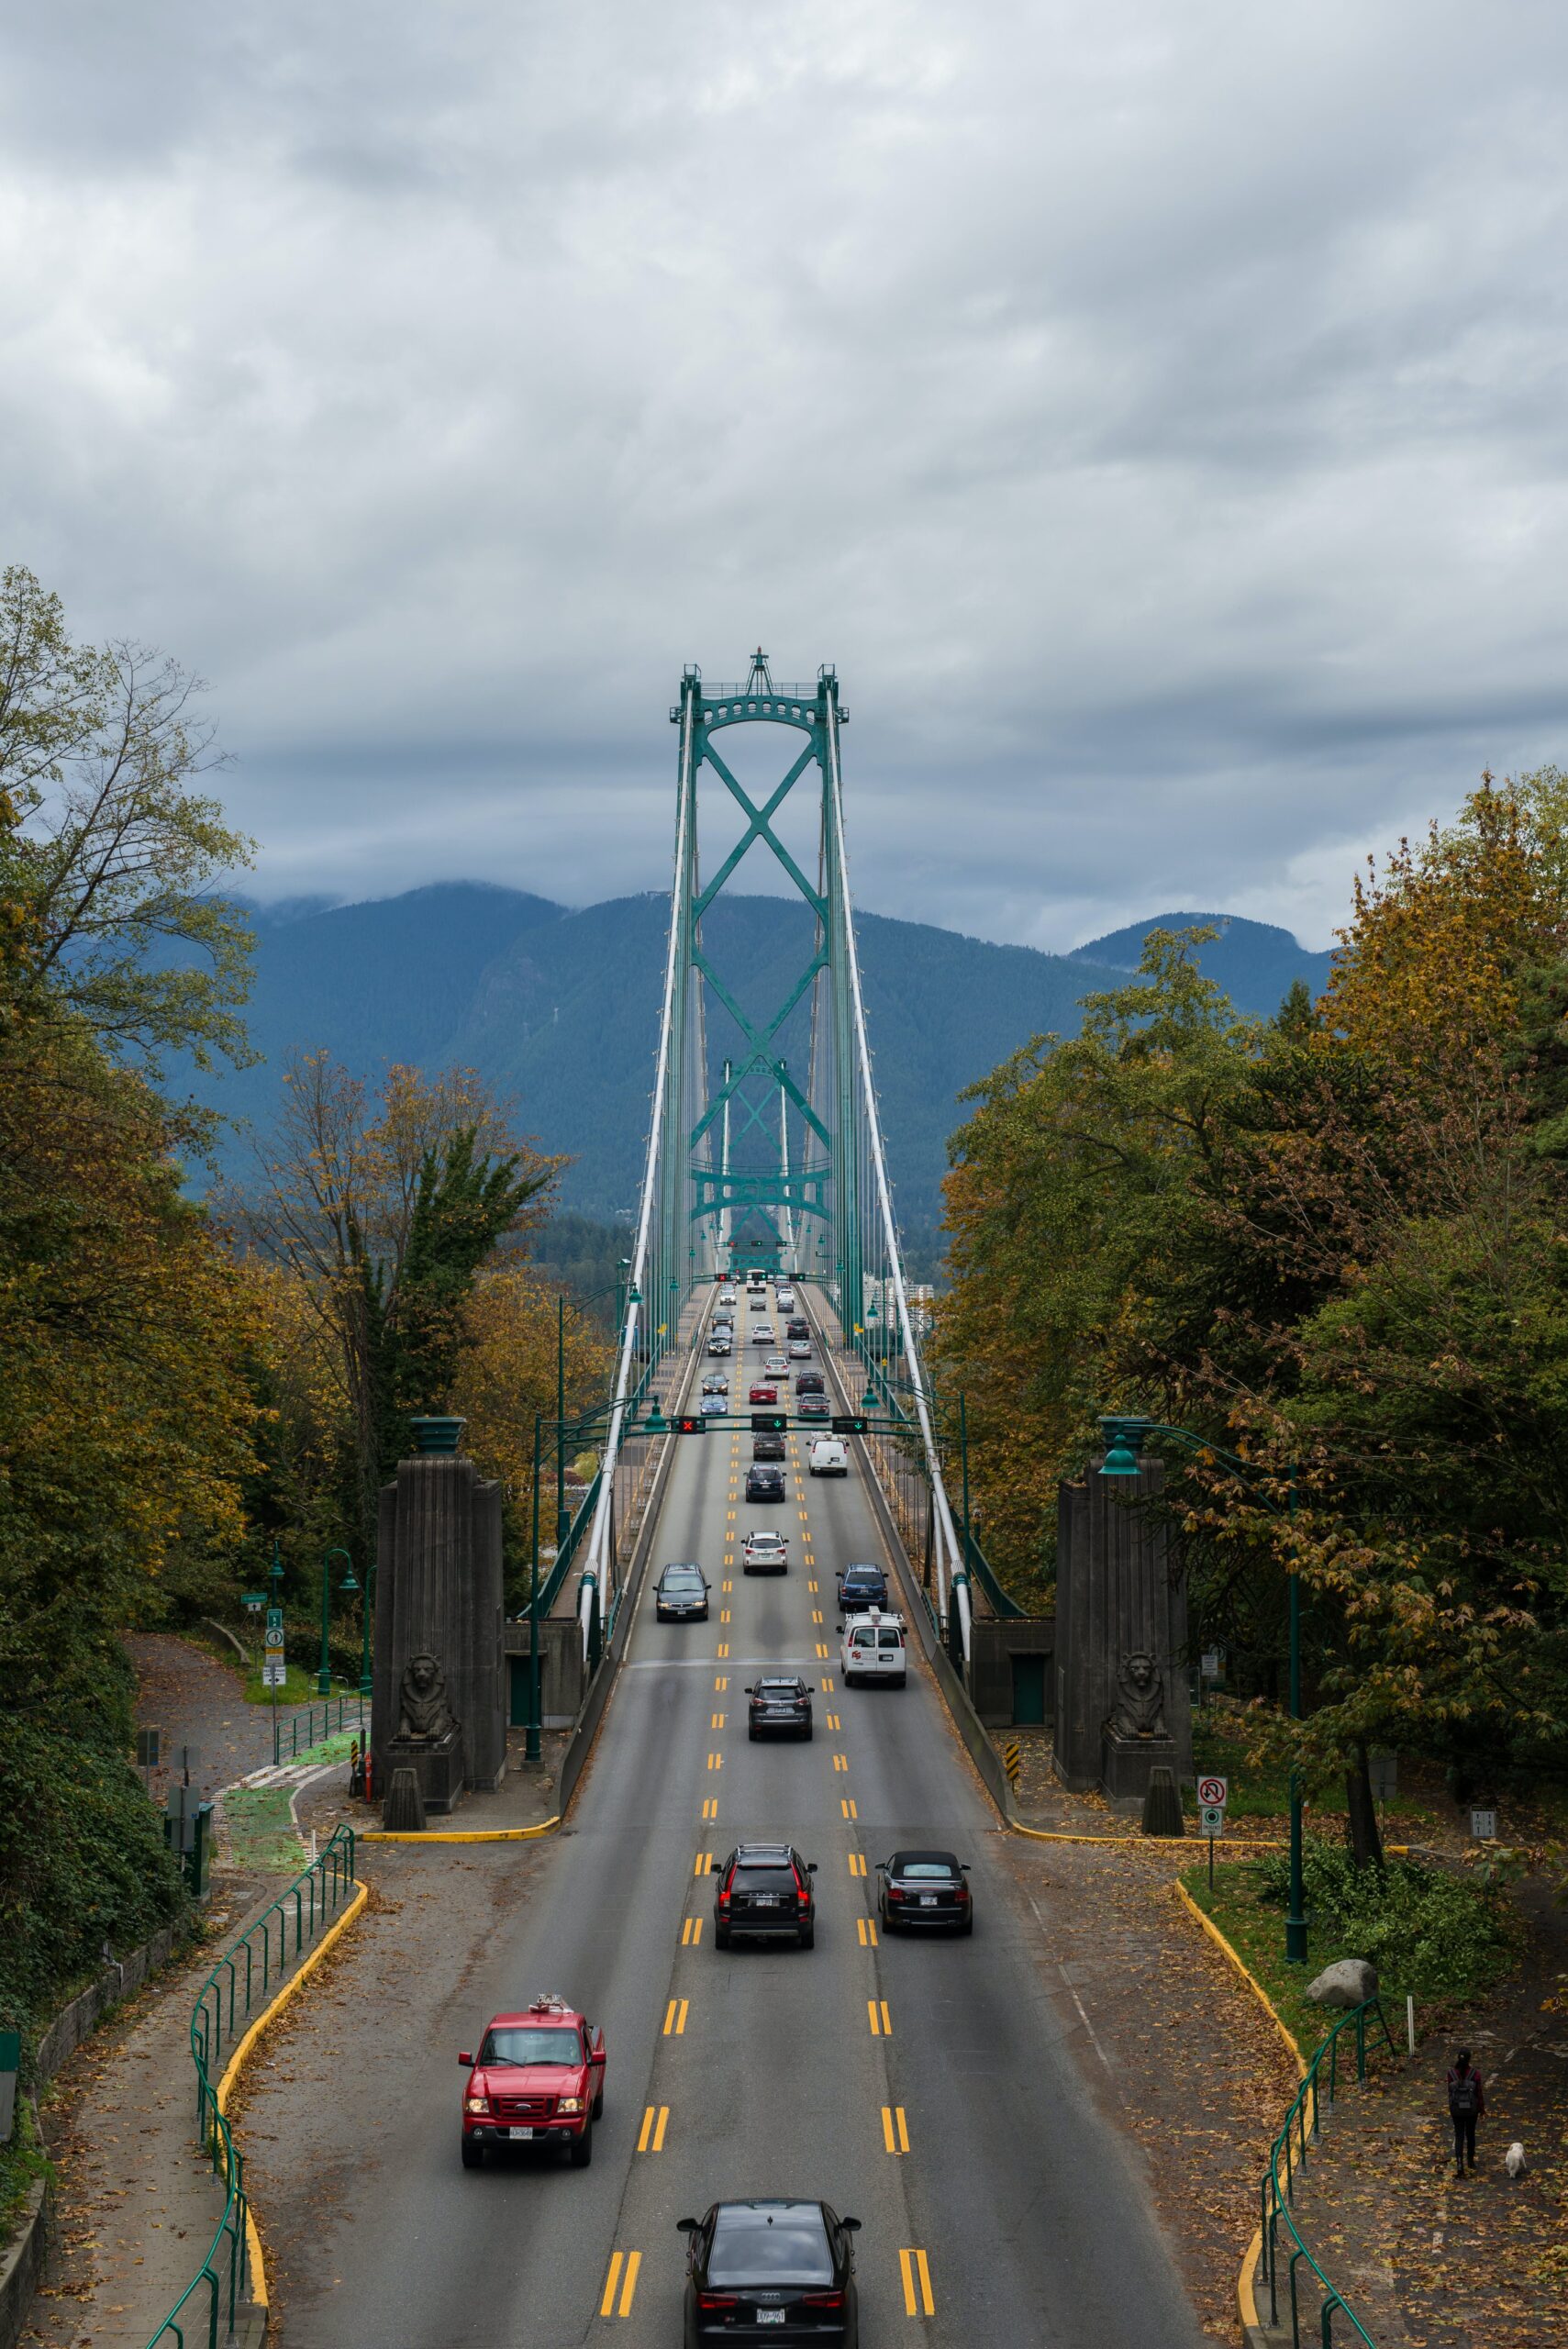 listing drivers in BC